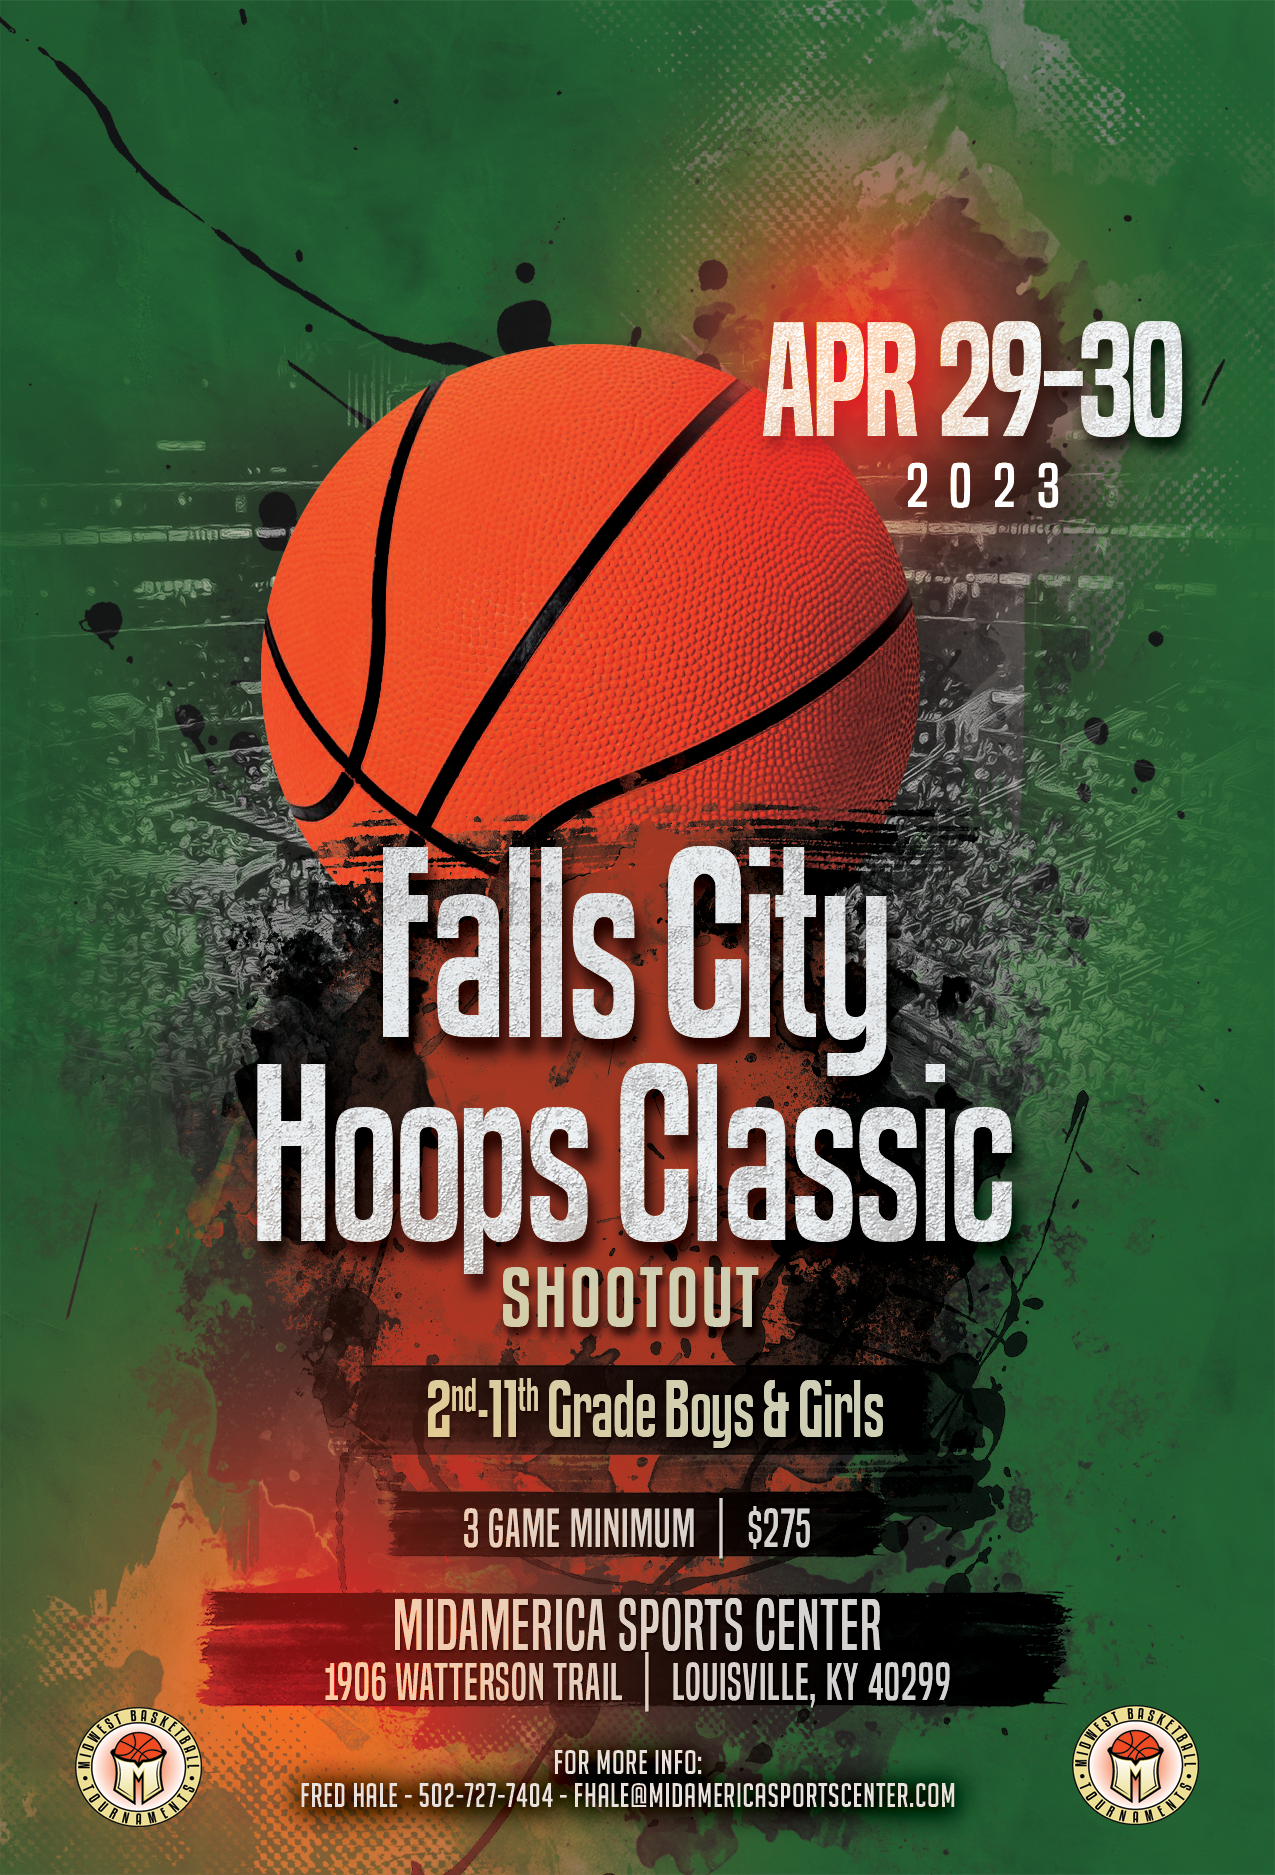 <span style="font-size: 12pt;"><strong><span style="color: #ff6600;"><strong>Falls City Hoops Classic<br /></strong>April 29-30, 2023<strong><br /><a href="http://www.midwestbballtournaments.com/ViewEvent.aspx?EID=1028">Click Here for more Info</a></strong></span></strong></span>